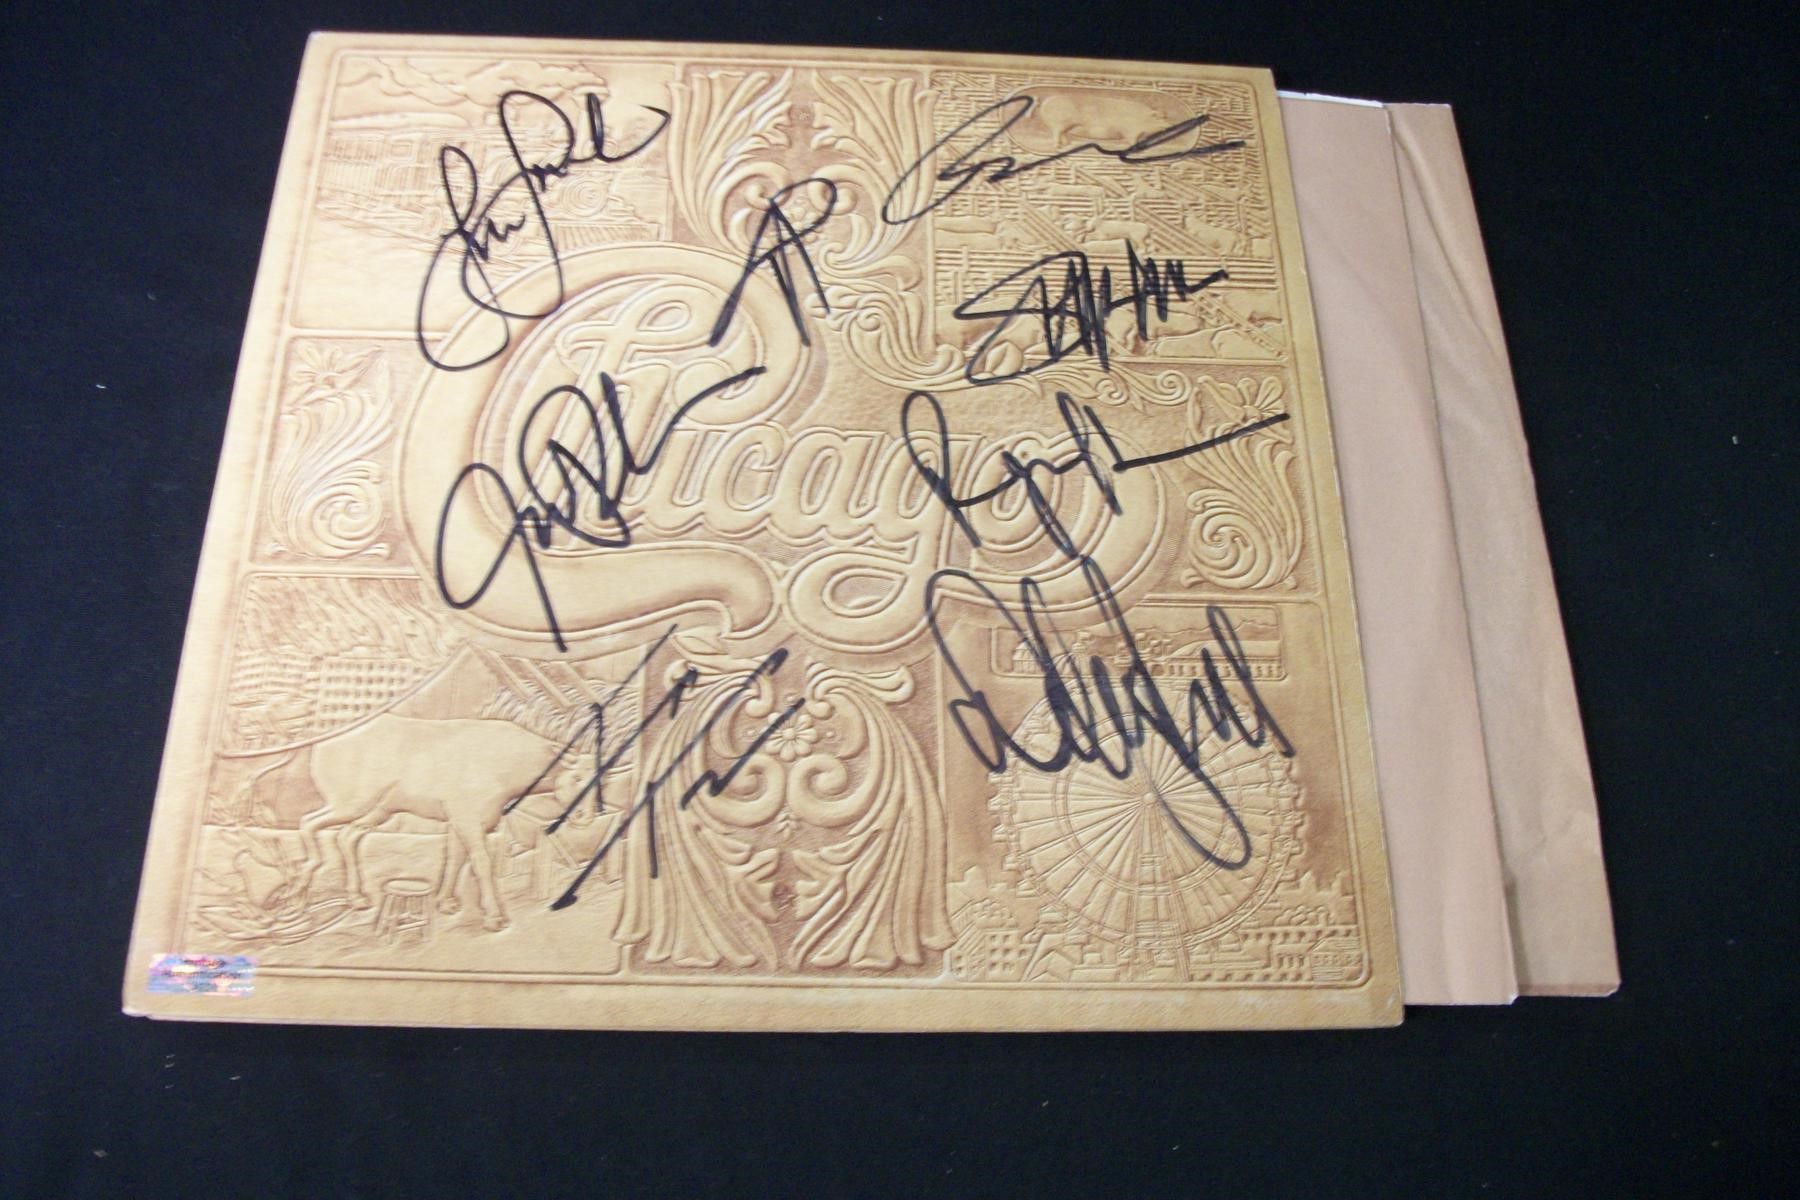 CHICAGO BAND SIGNED ALBUM COVER HERITAGE